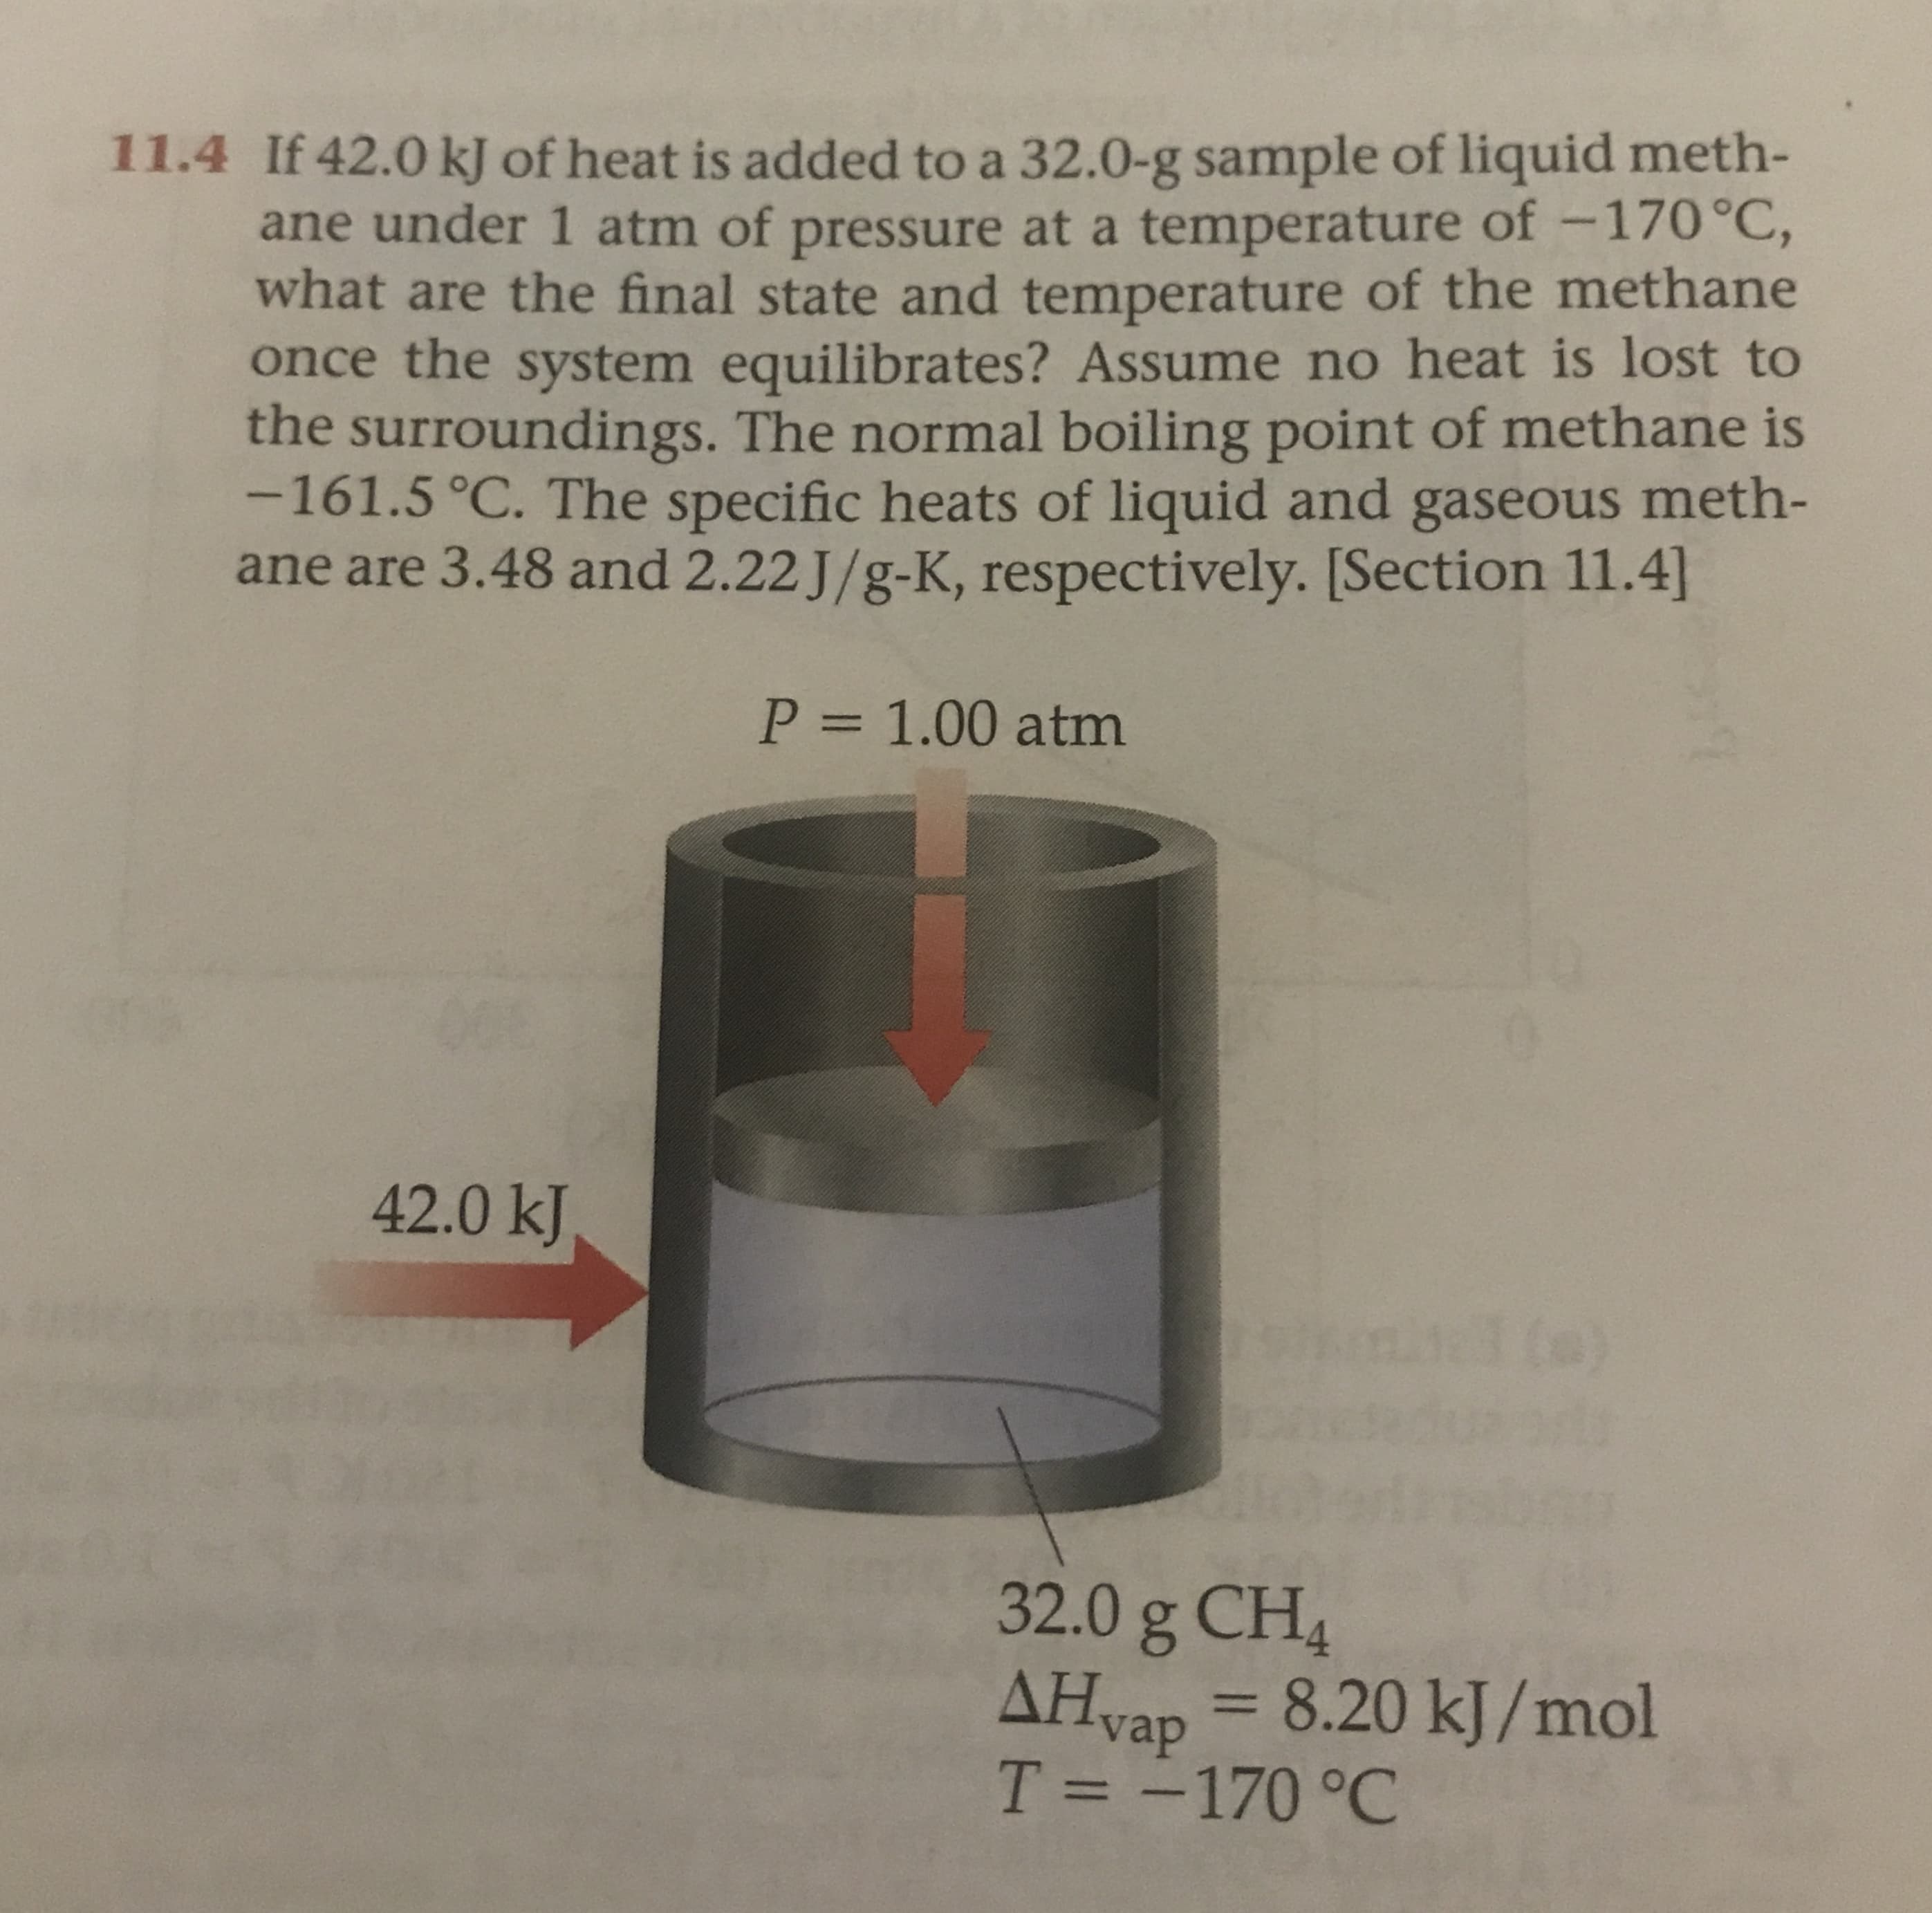 11.4 If 42.0 kJ of heat is added to a 32.0-g sample of liquid meth-
ane under 1 atm of pressure at a temperature of -170°C,
what are the final state and temperature of the methane
once the system equilibrates? Assume no heat is lost to
the surroundings. The normal boiling point of methane is
-161.5 °C. The specific heats of liquid and gaseous meth-
ane are 3.48 and 2.22 J/g-K, respectively. [Section 11.4
P= 1.00 atm
00%
42.0 kJ
(o
32.0 g CH4
AHvap 8.20 kJ/mol
T = -170 °C
